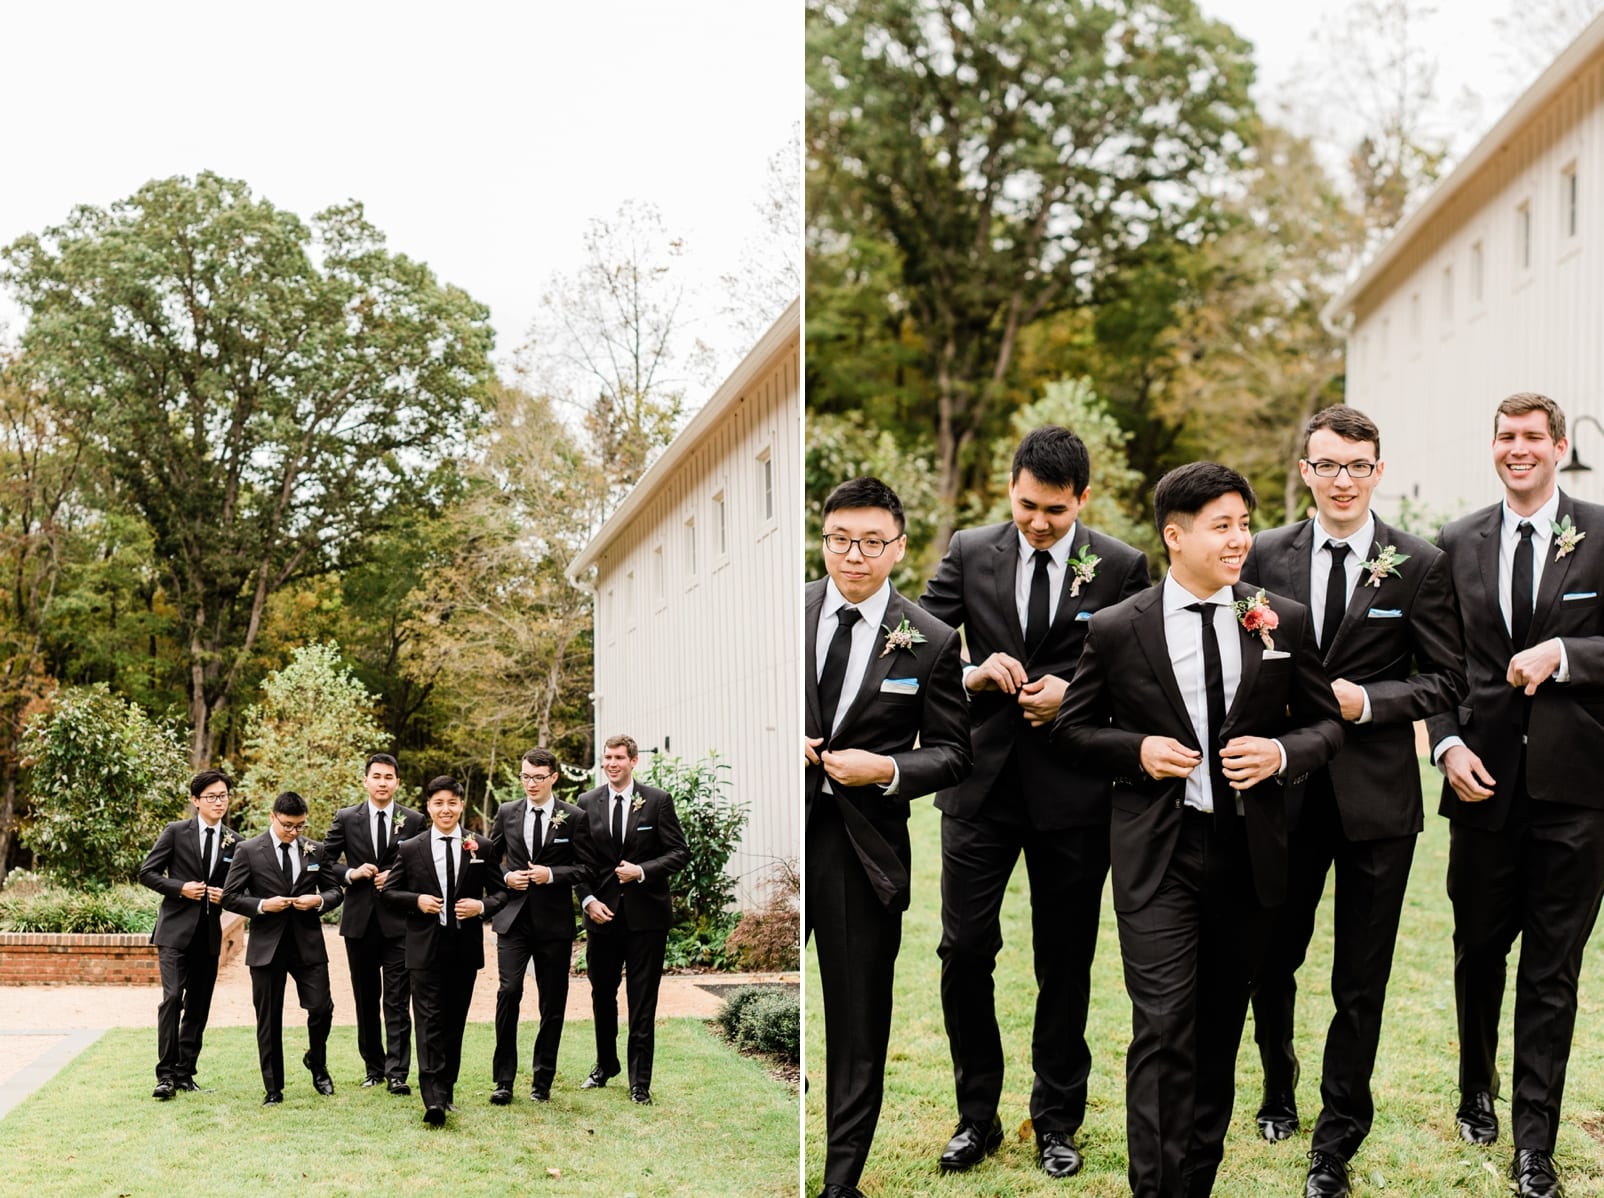 Barn of Chapel Hill groomsmen walking with the groom buttoning their jackets photo